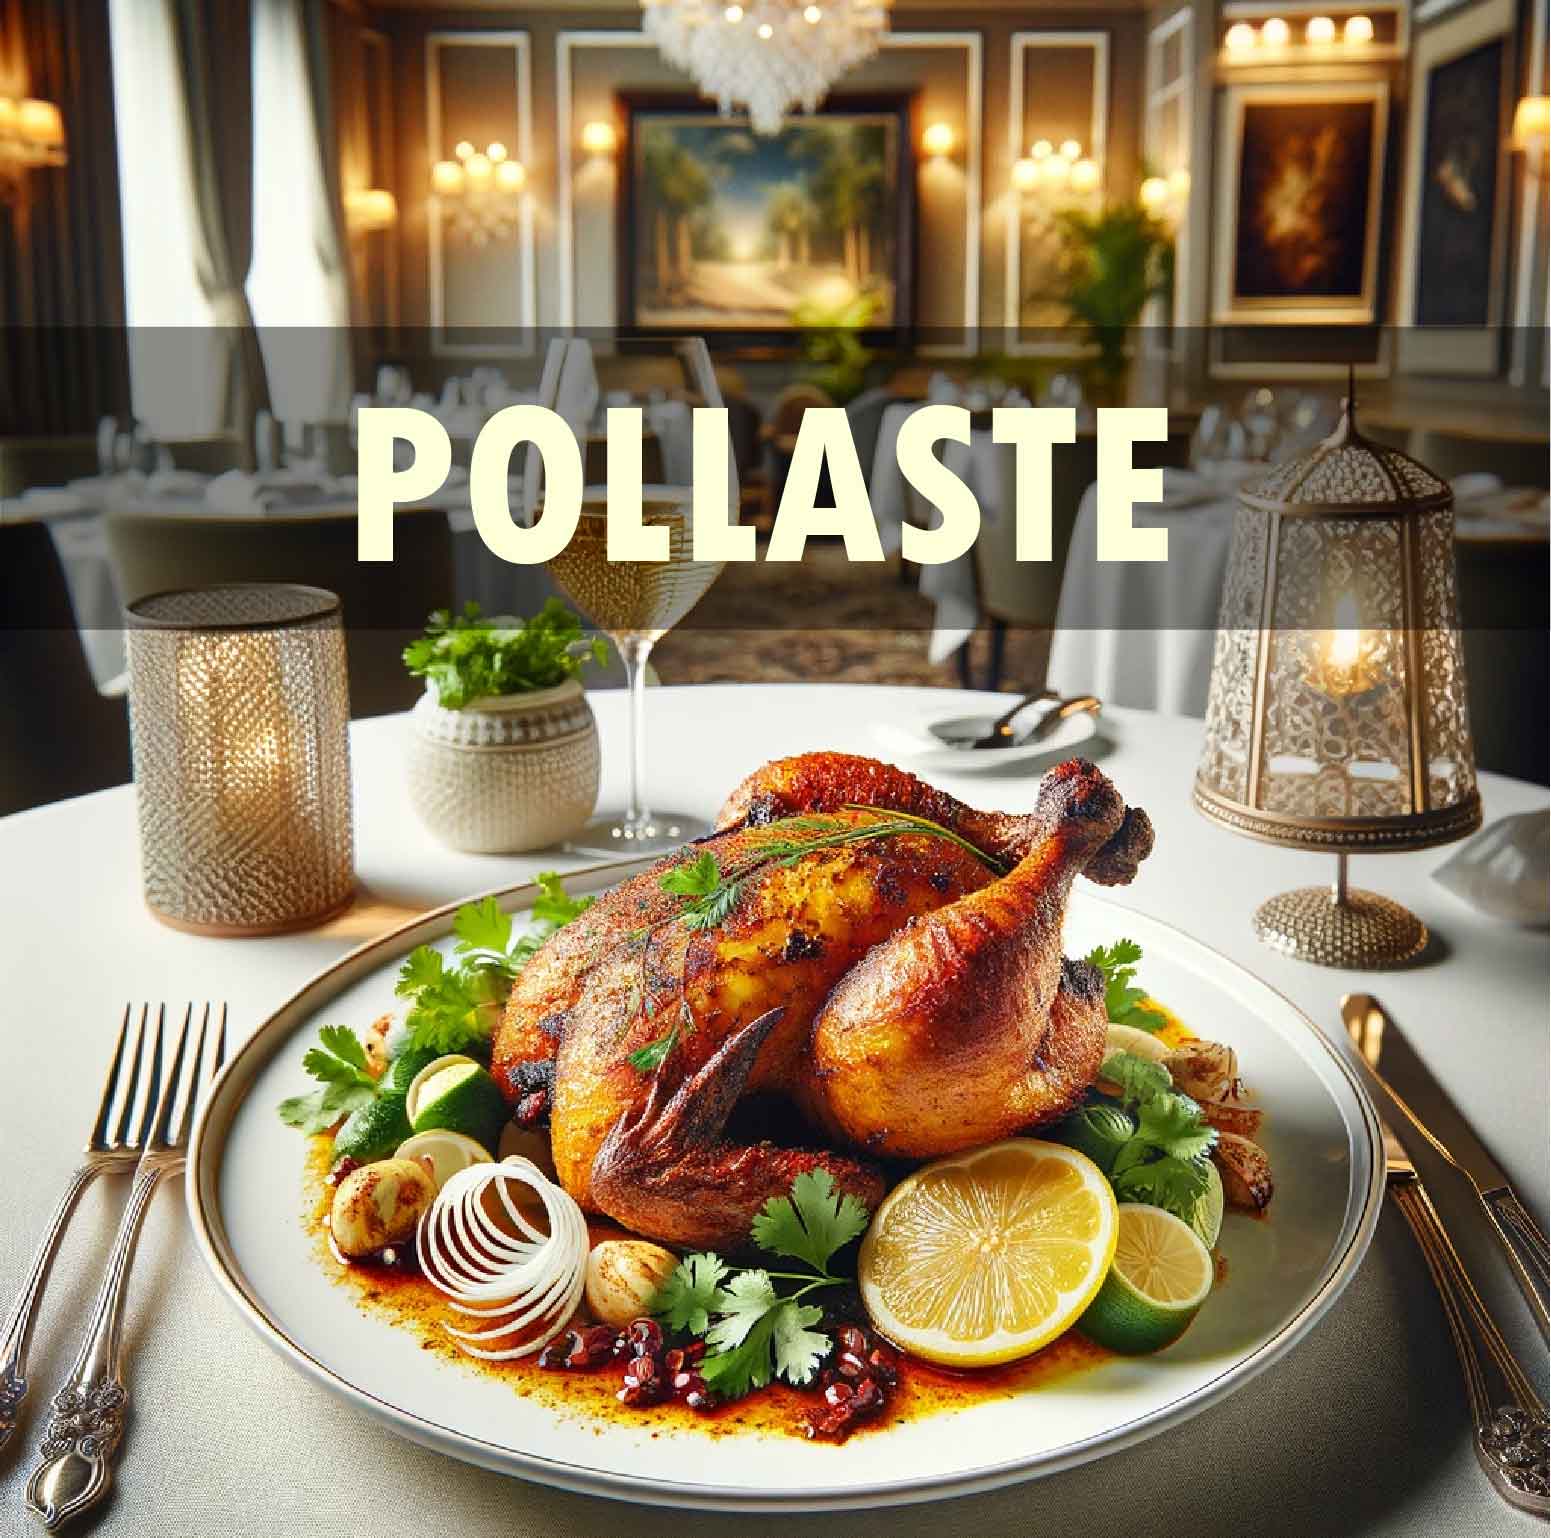 What is pollaste?